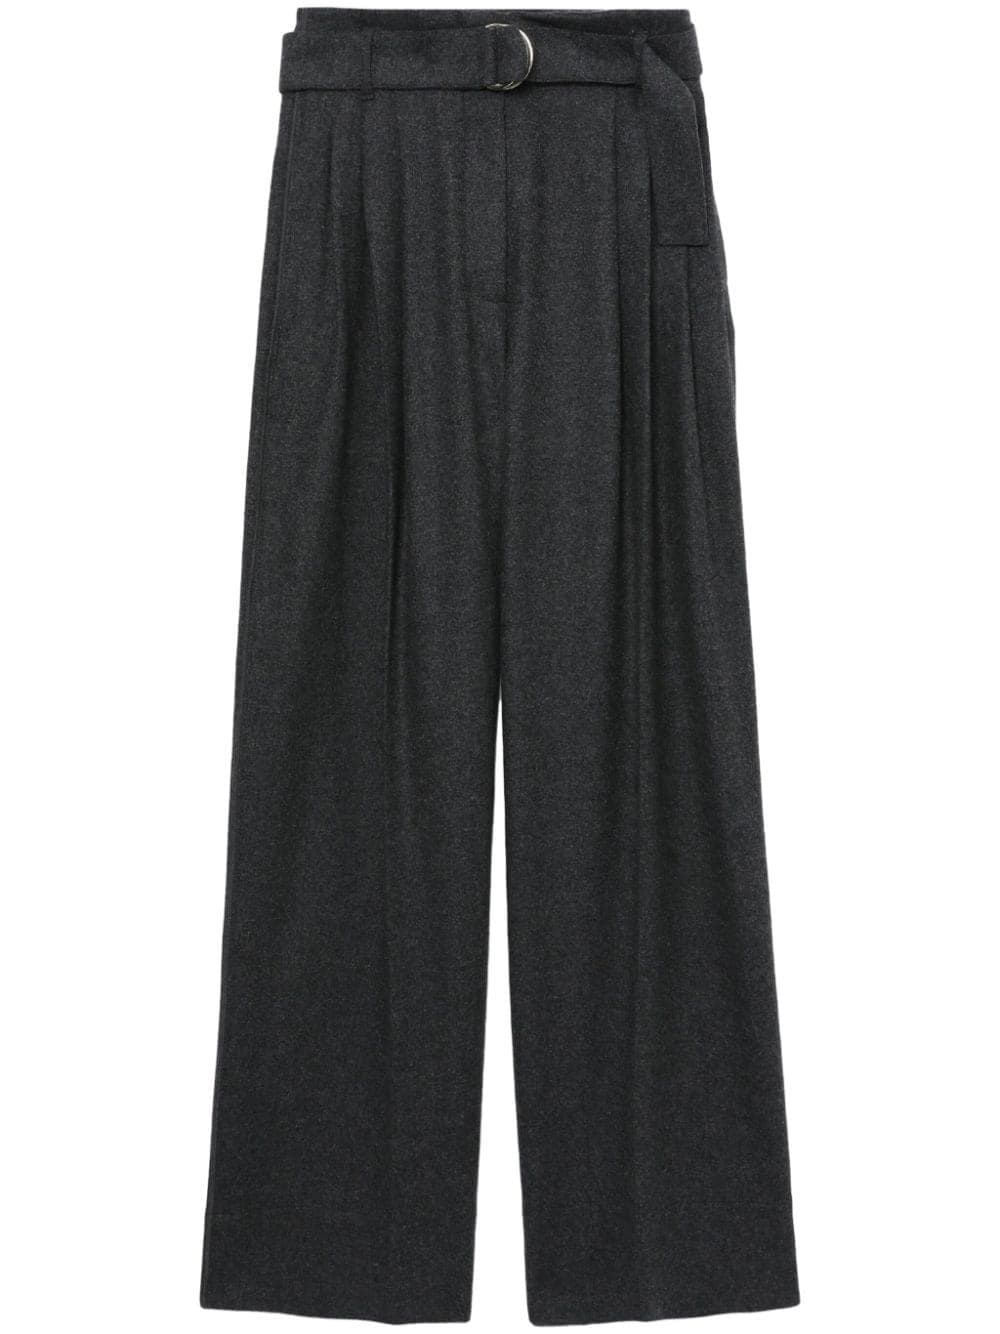 3.1 Phillip Lim / フィリップ リム Pleat-detailing Wool Blend Palazzo Trousers In Grey